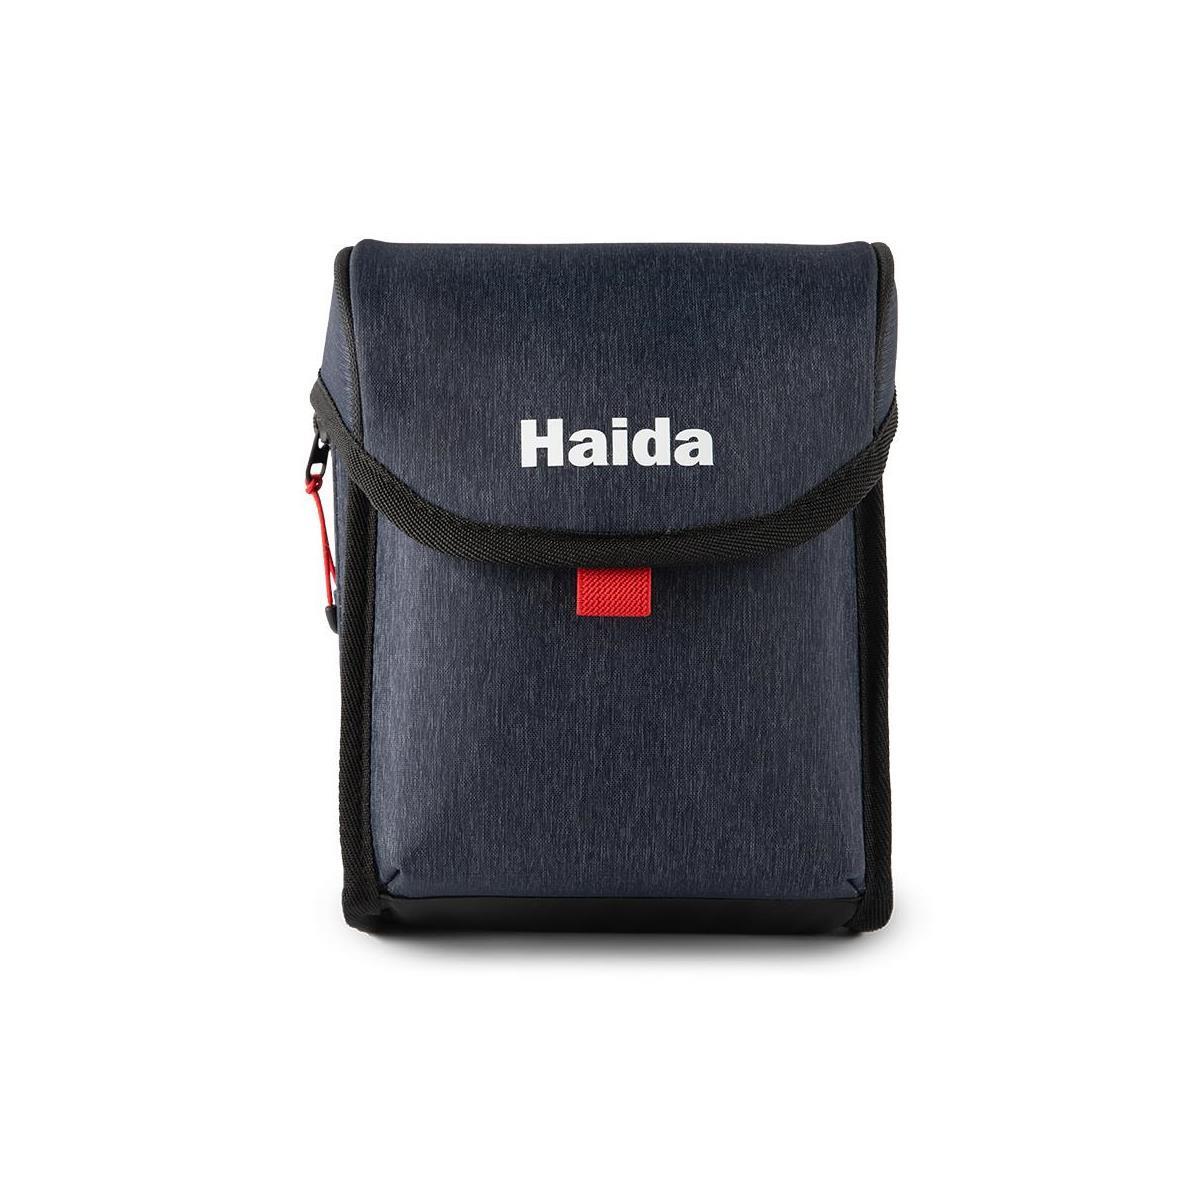 Haida M10 Filter Pouch (To hold 8pcs of 100mm insert filters and a holder) main image